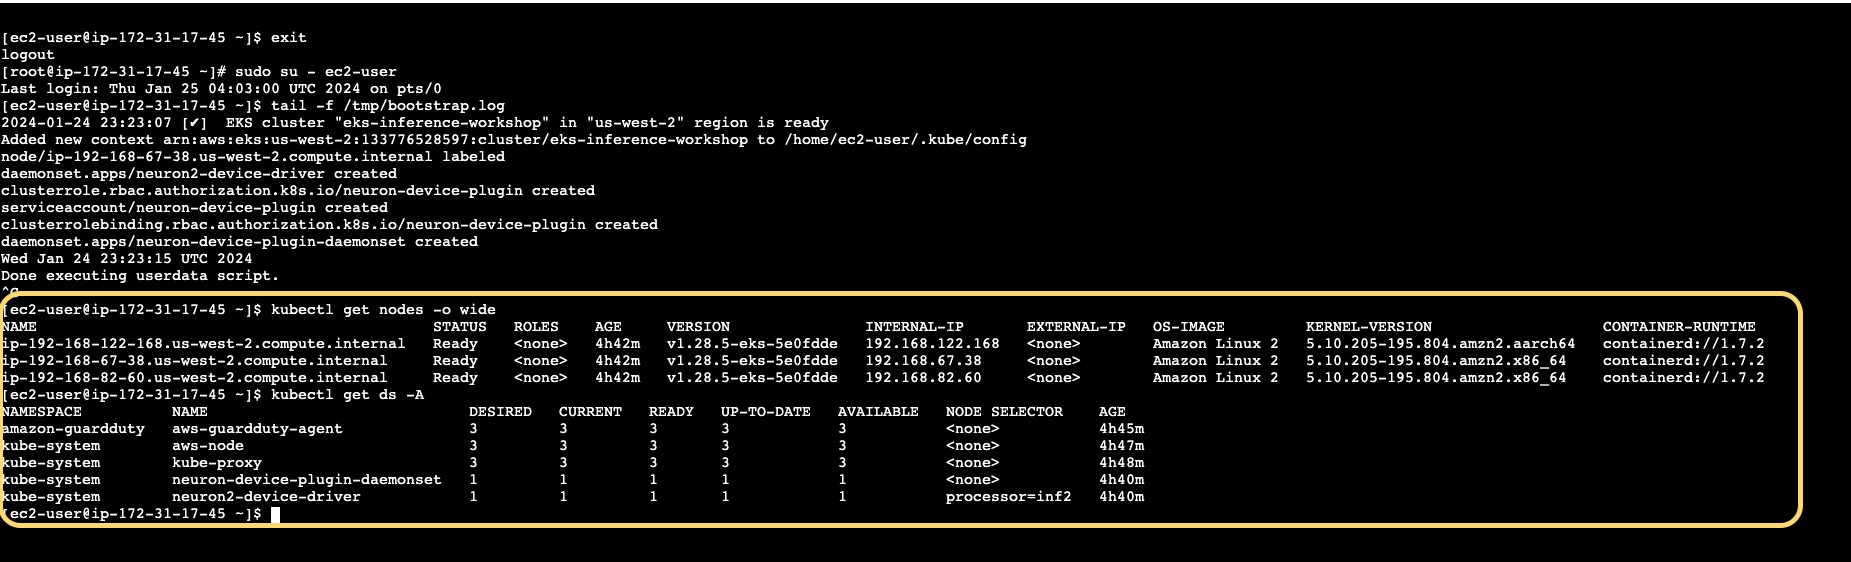 Validate status and conection to EKS cluster via CLI